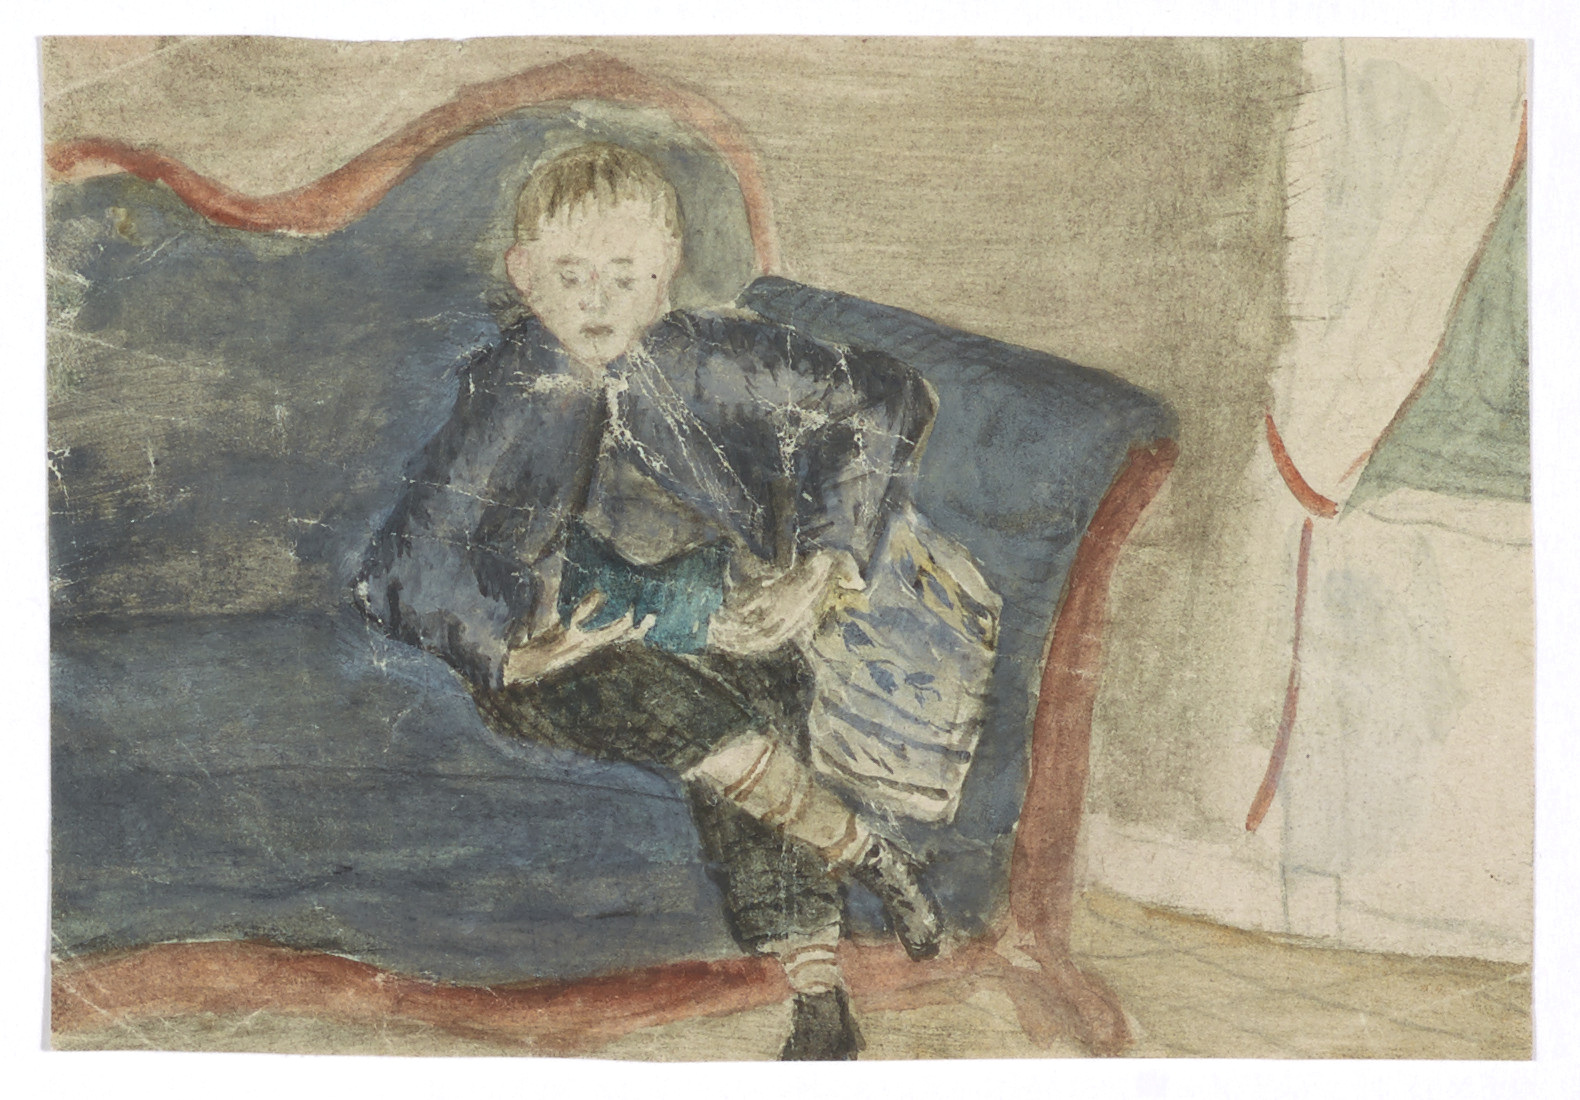 Edvard Munch: Andreas on the couch. Watercolour and pencil. 1875. Photo © Munchmuseet